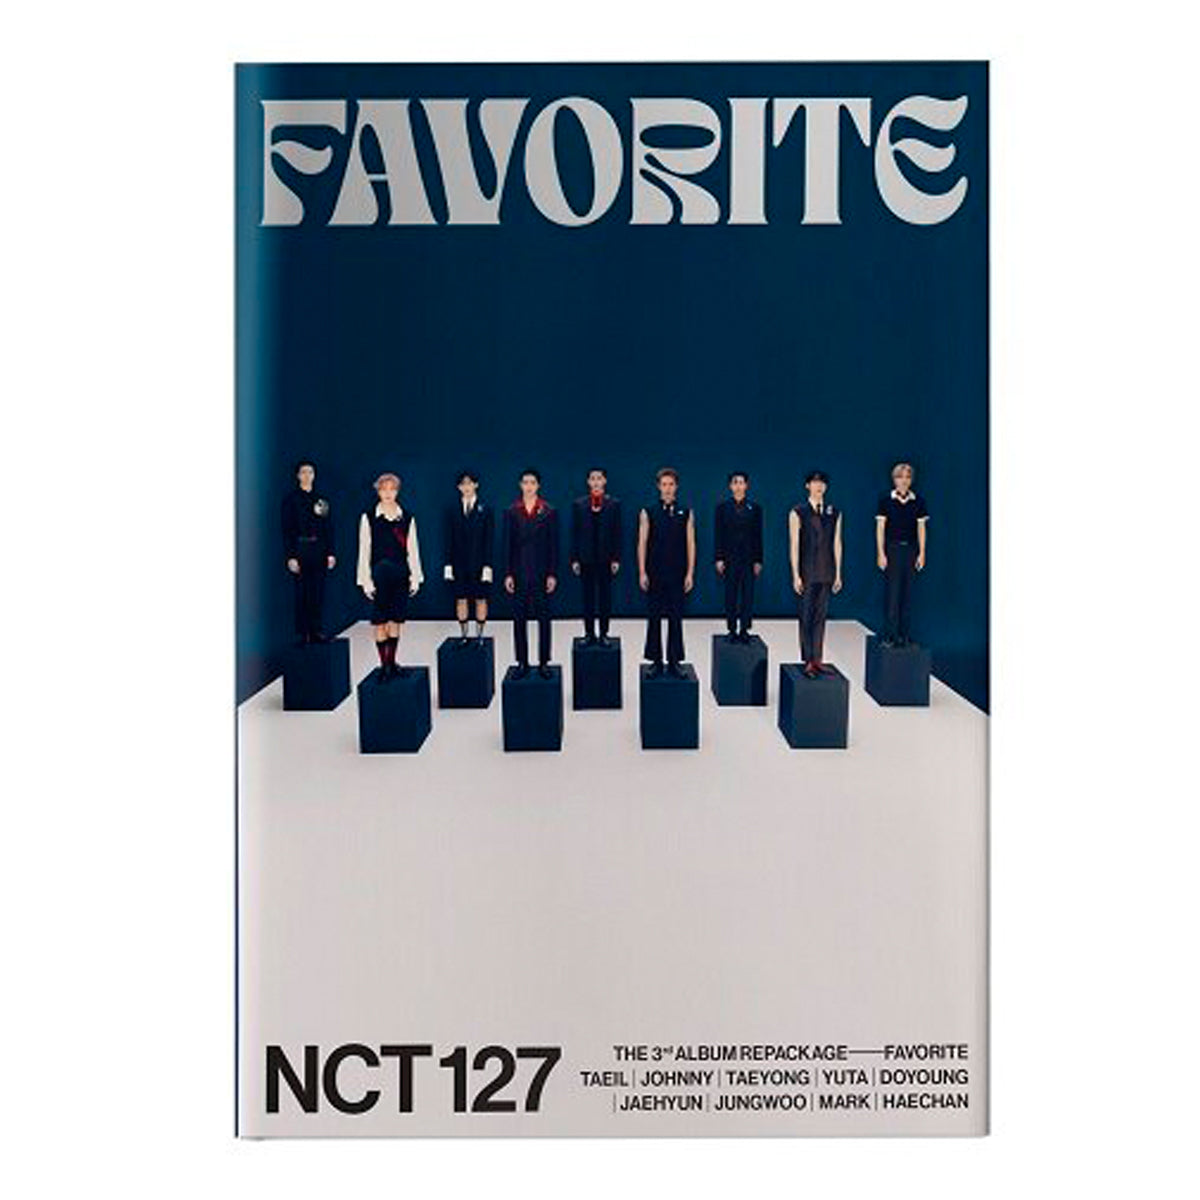 NCT 127 3RD ALBUM REPACKAGE 'FAVORITE' CLASSIC COVER